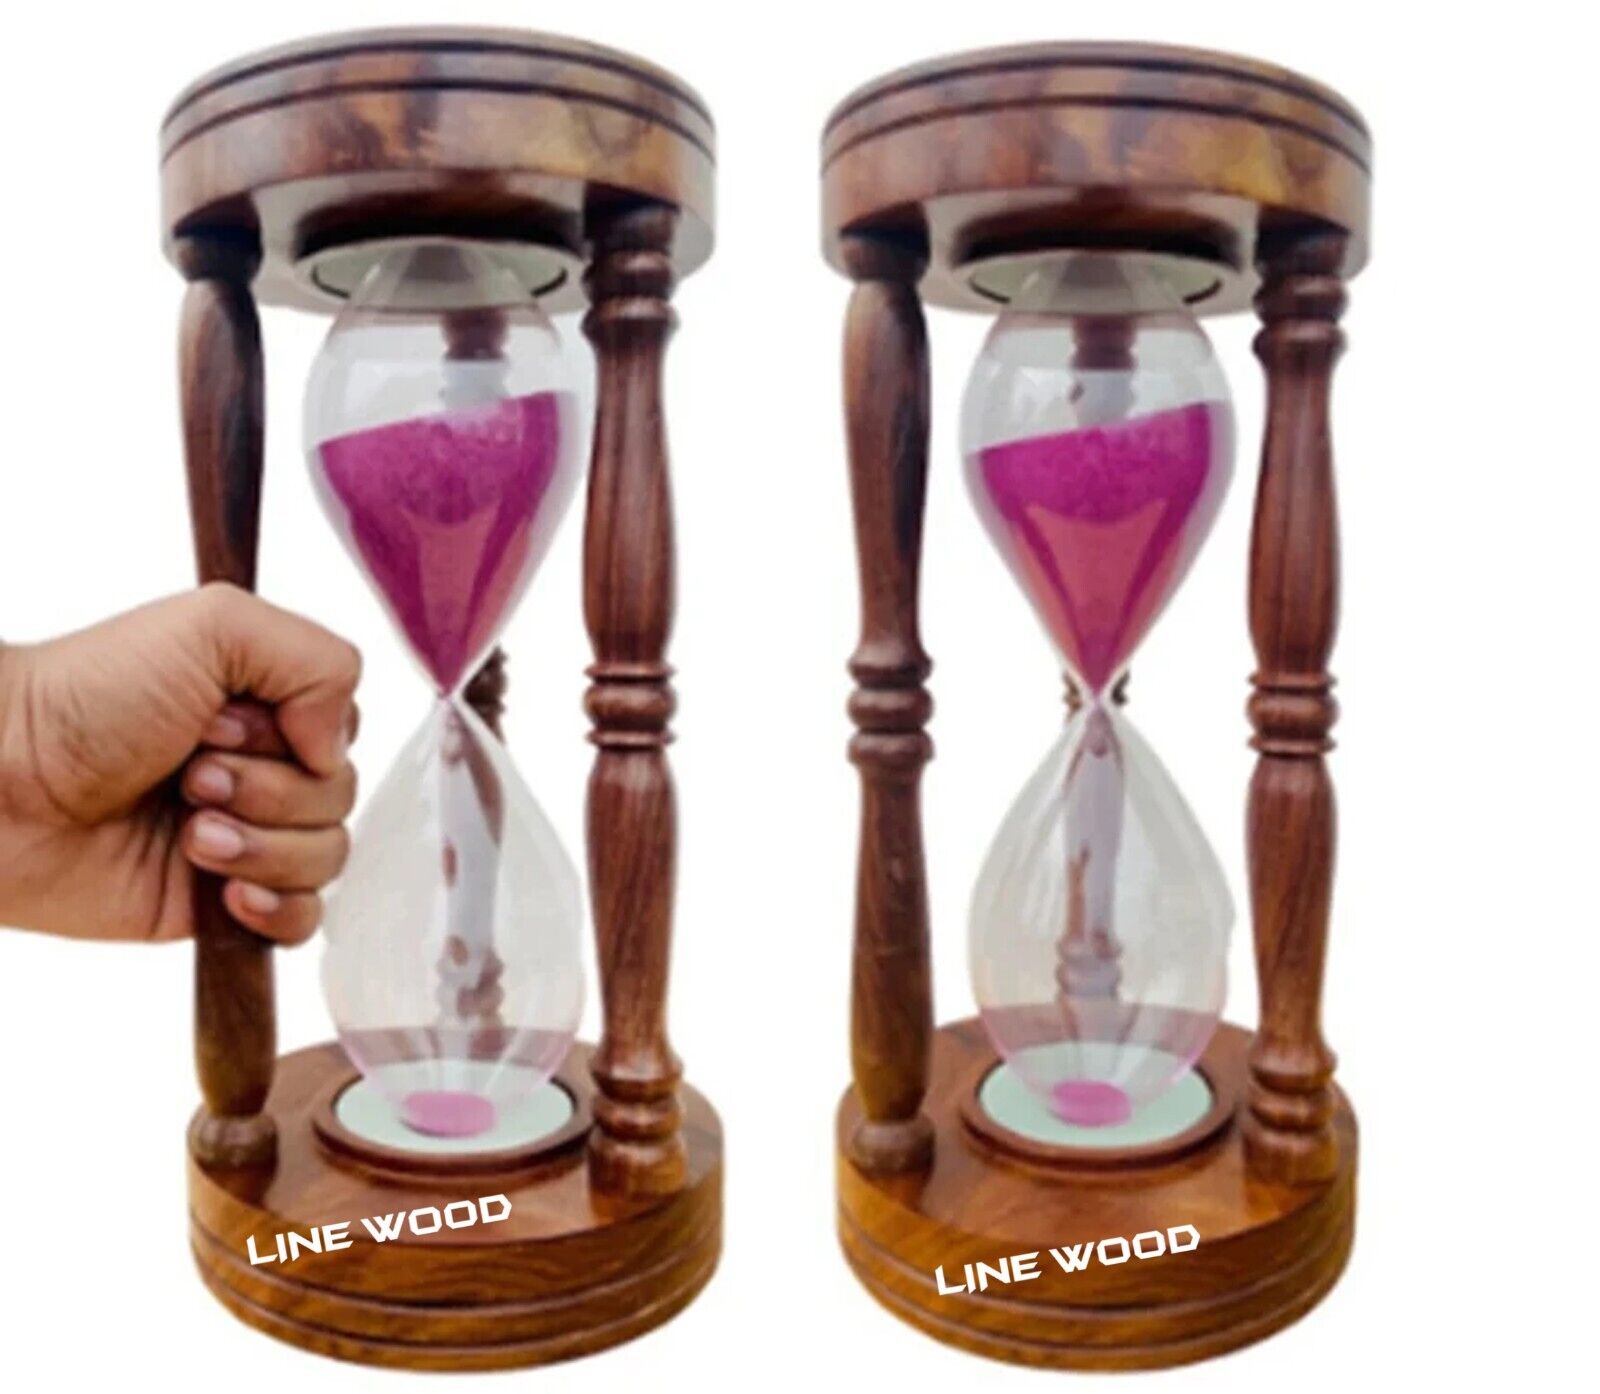 The 30 minute hourglass has cool Wooden bases & stand, matched with the stylish